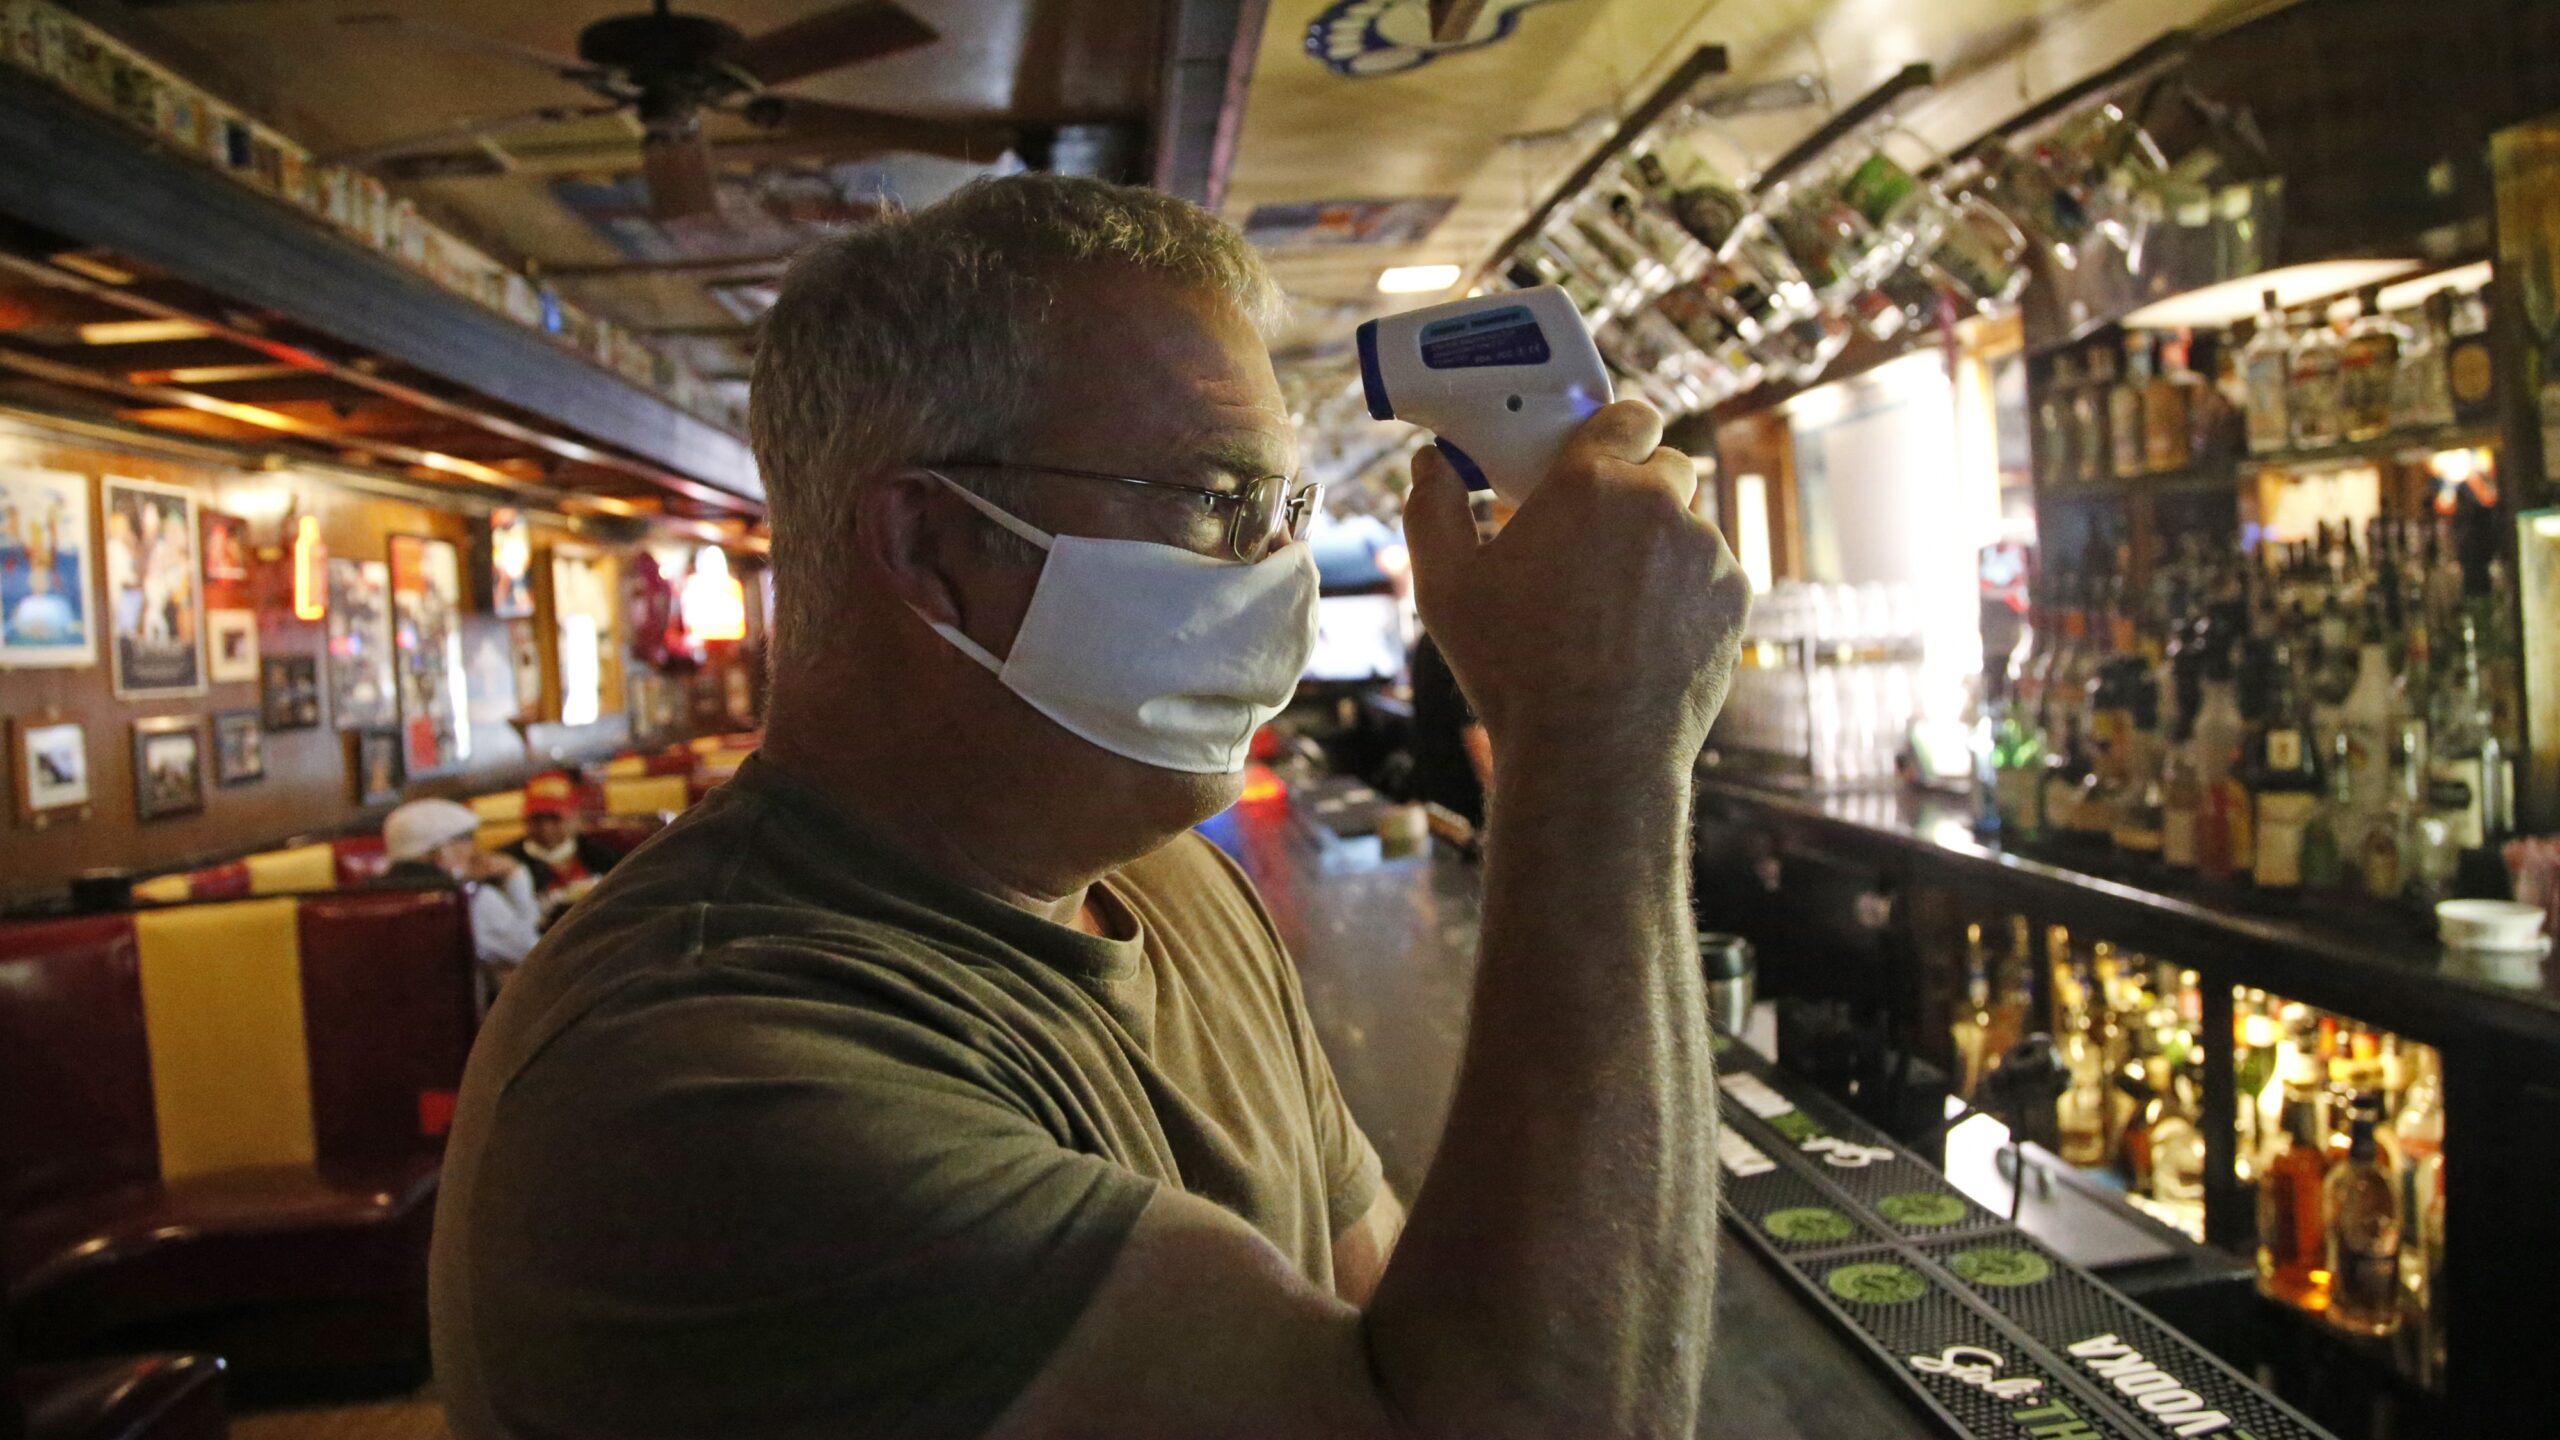 Cheers to You bar owner Bob Brown tests a thermometer at his bar